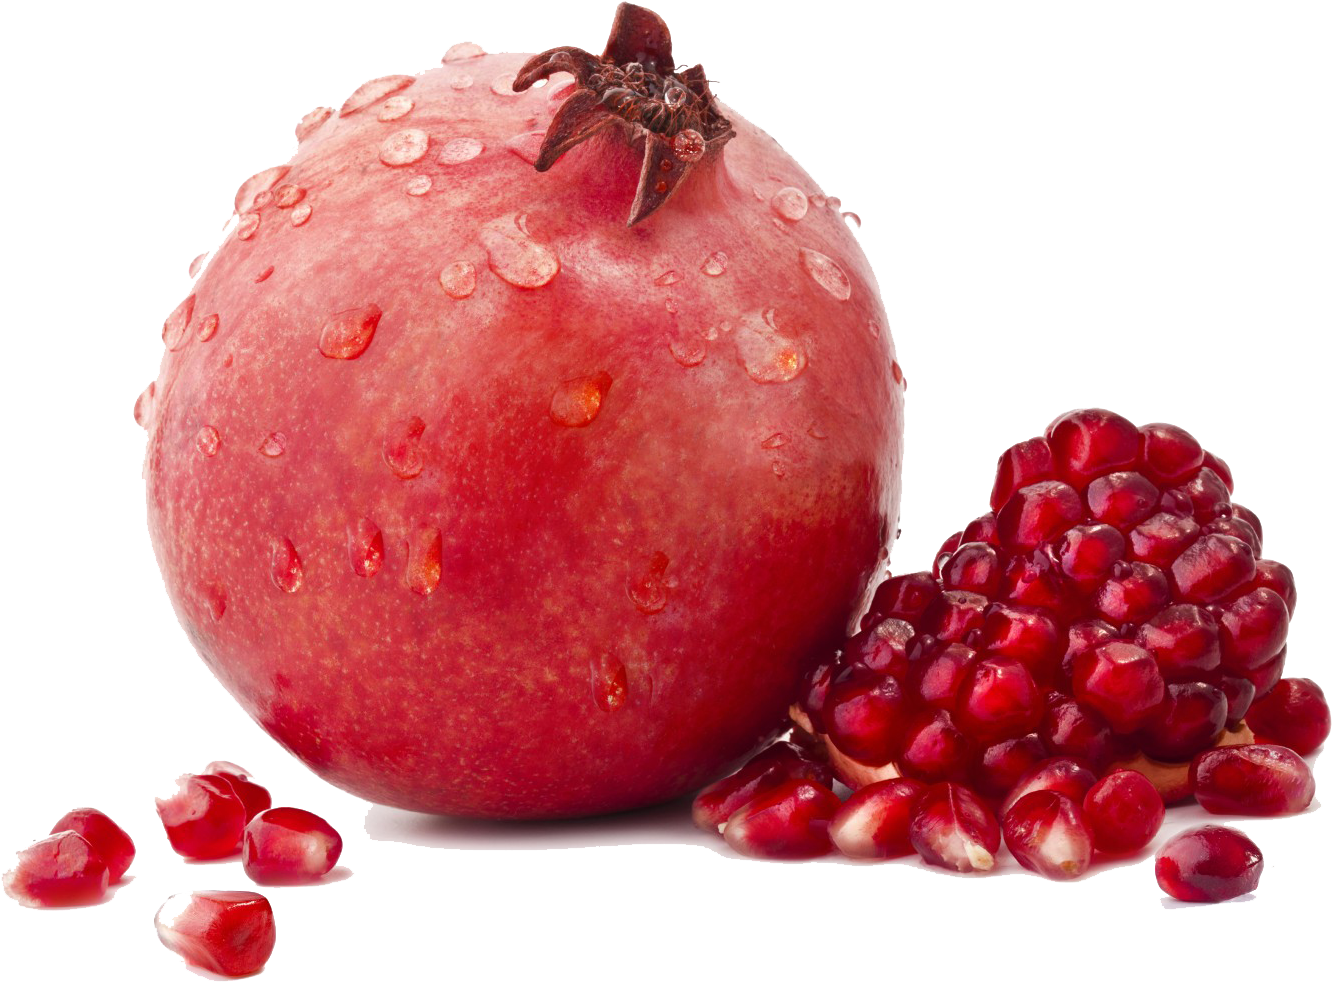 A Pomegranate With Seeds